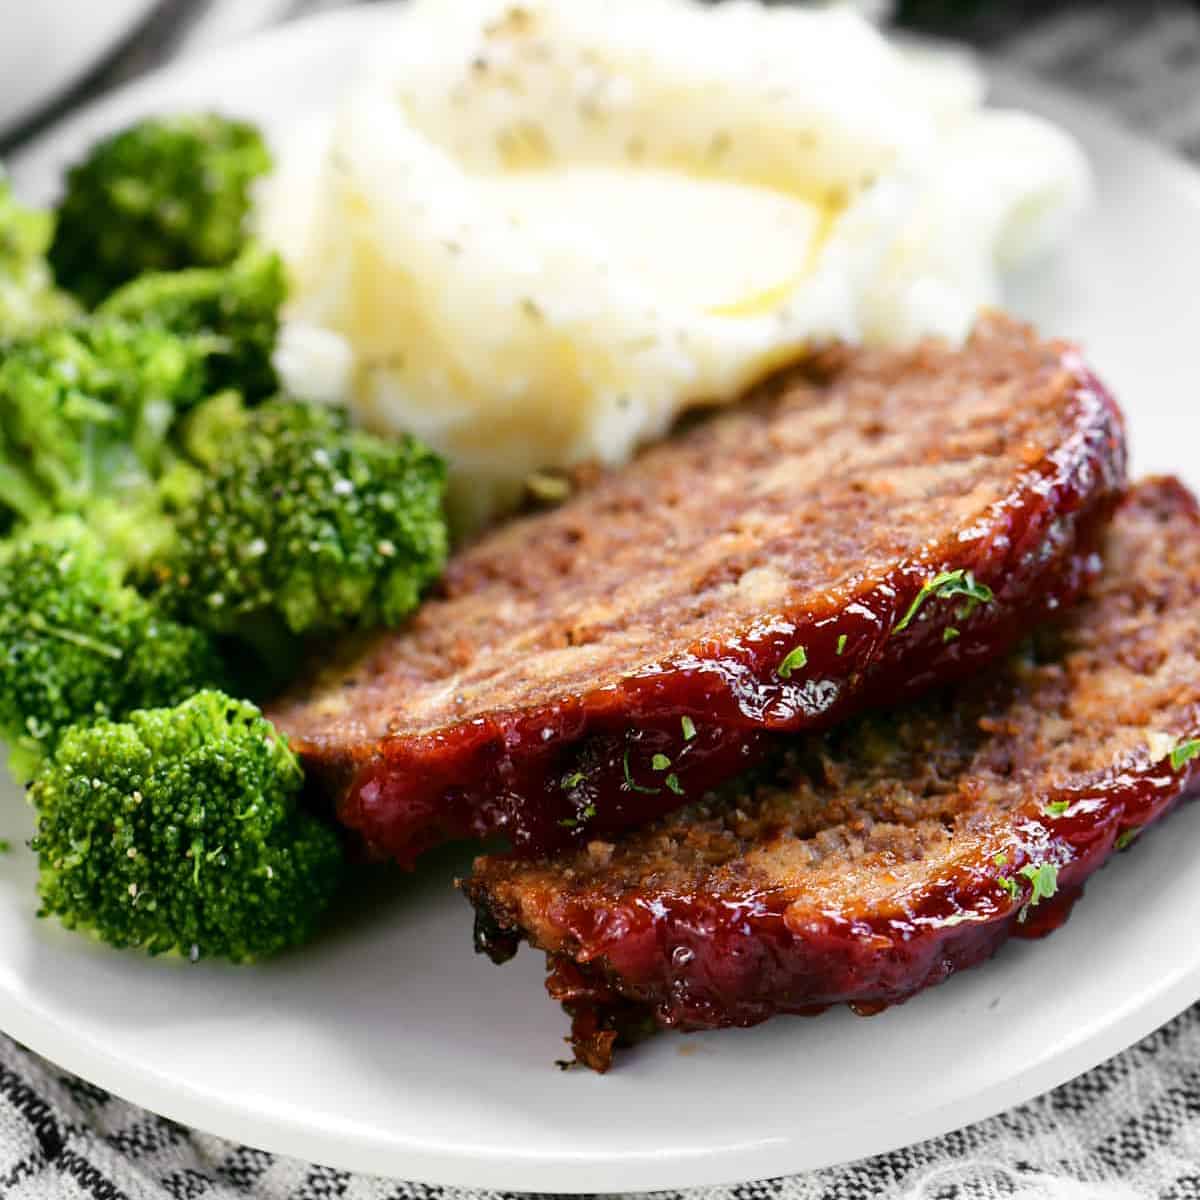 sliced meatloaf with mashed potatoes and broccoli.